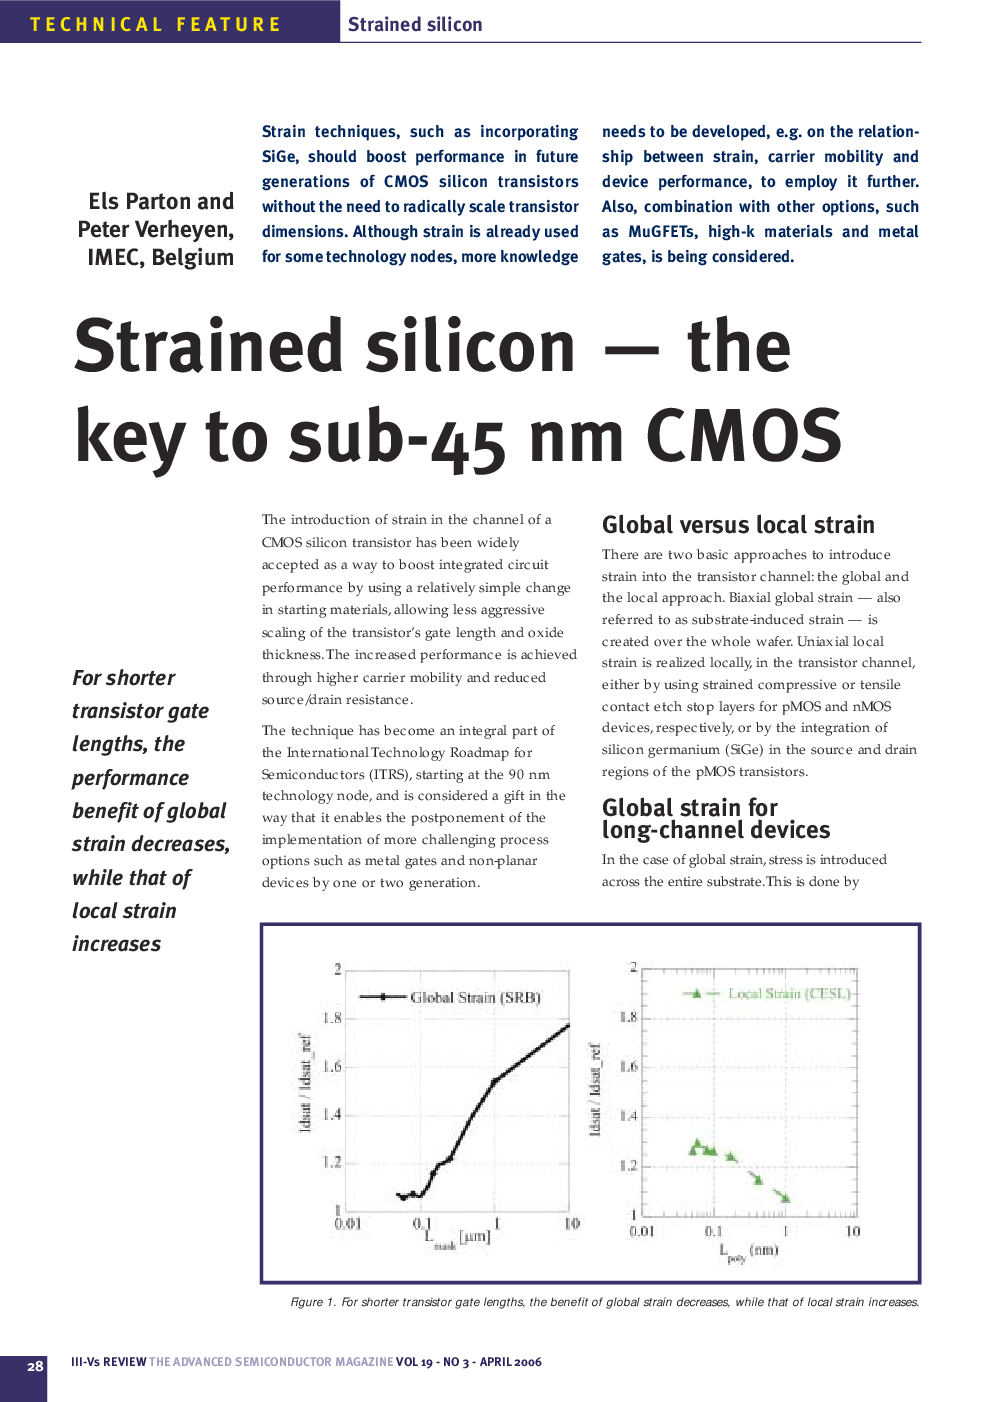 Strained silicon — the key to sub-45 nm CMOS